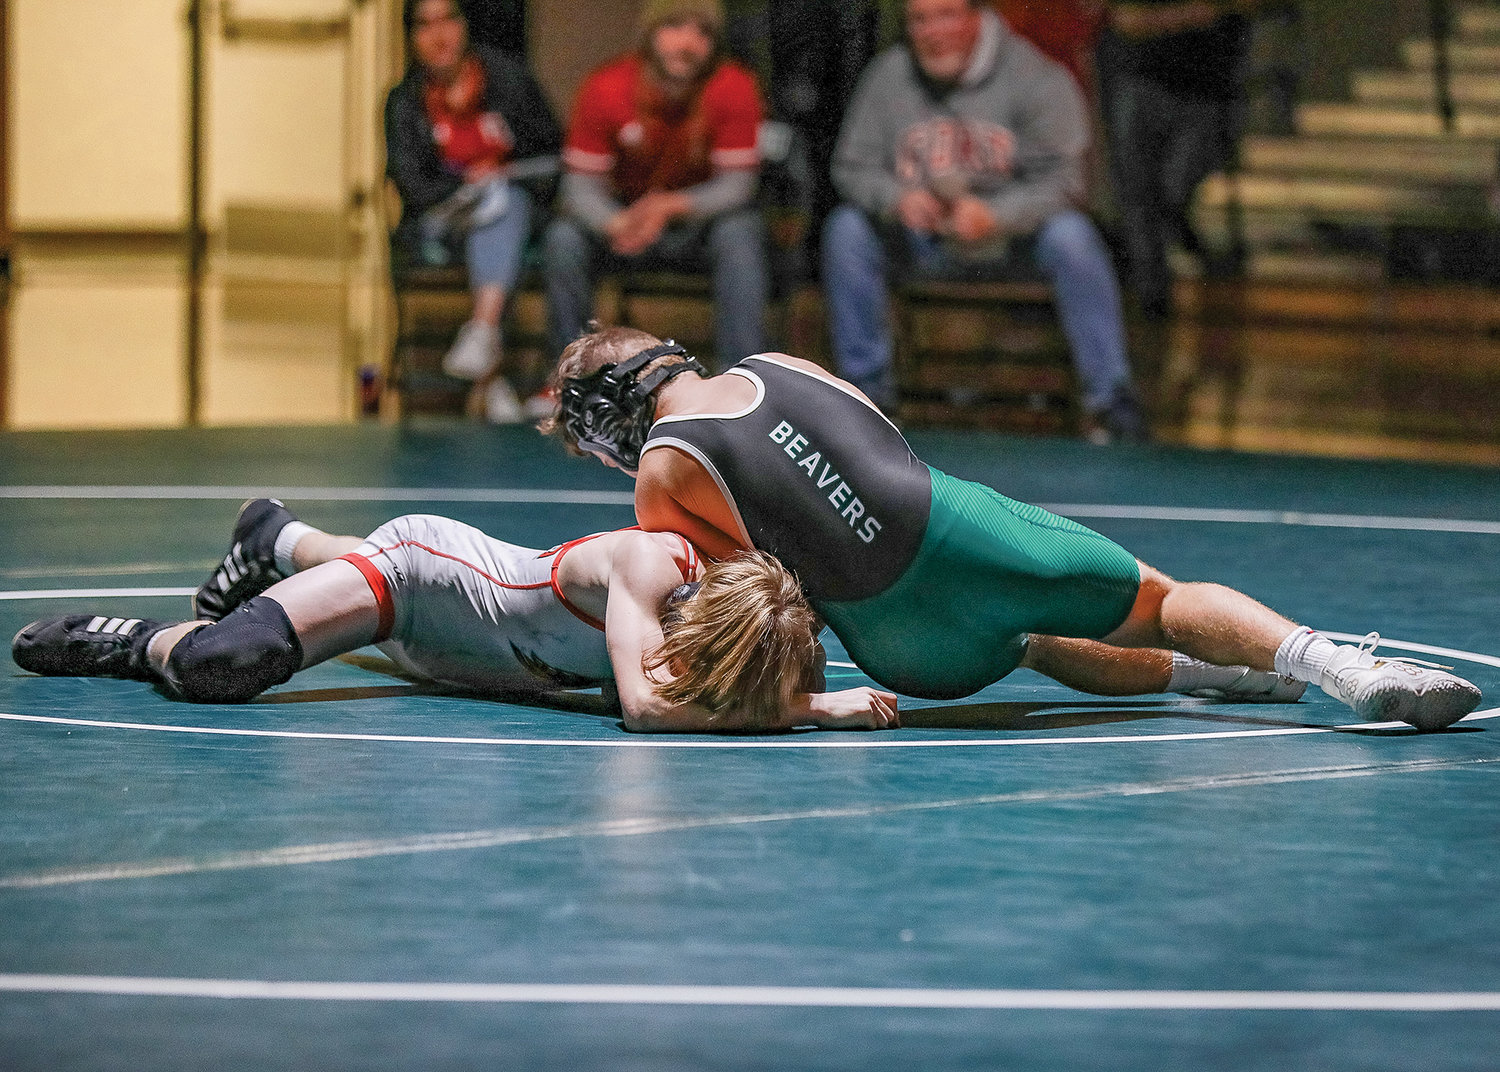 Mateo Gutridge gains a position on a Fort Vancouver wrestler during a home match on Wednesday, Jan. 11.